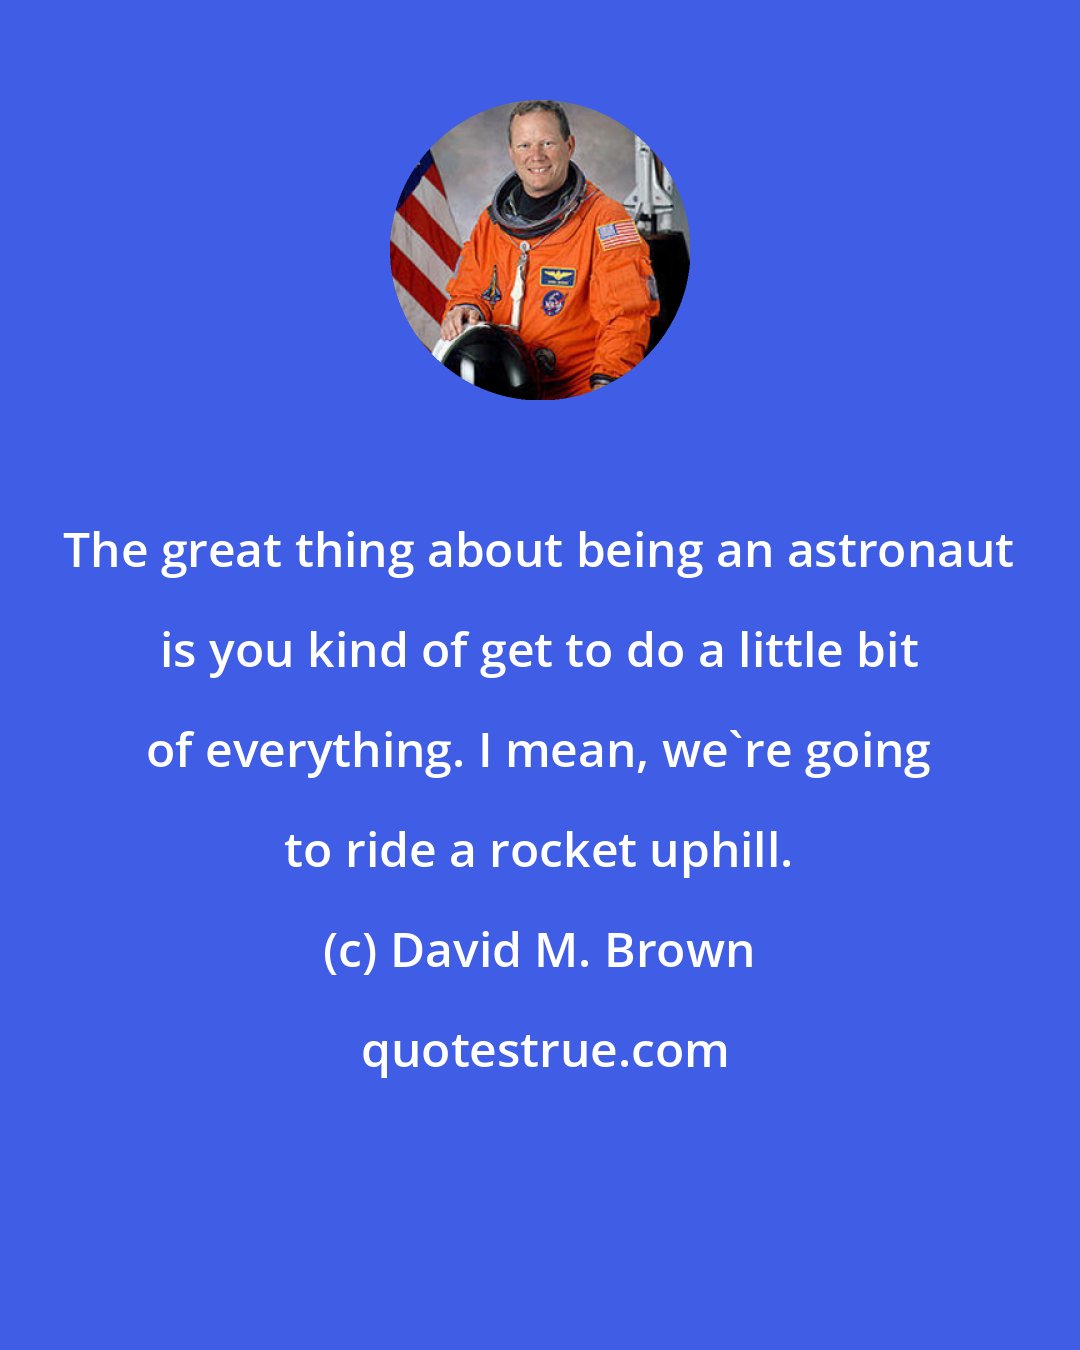 David M. Brown: The great thing about being an astronaut is you kind of get to do a little bit of everything. I mean, we're going to ride a rocket uphill.